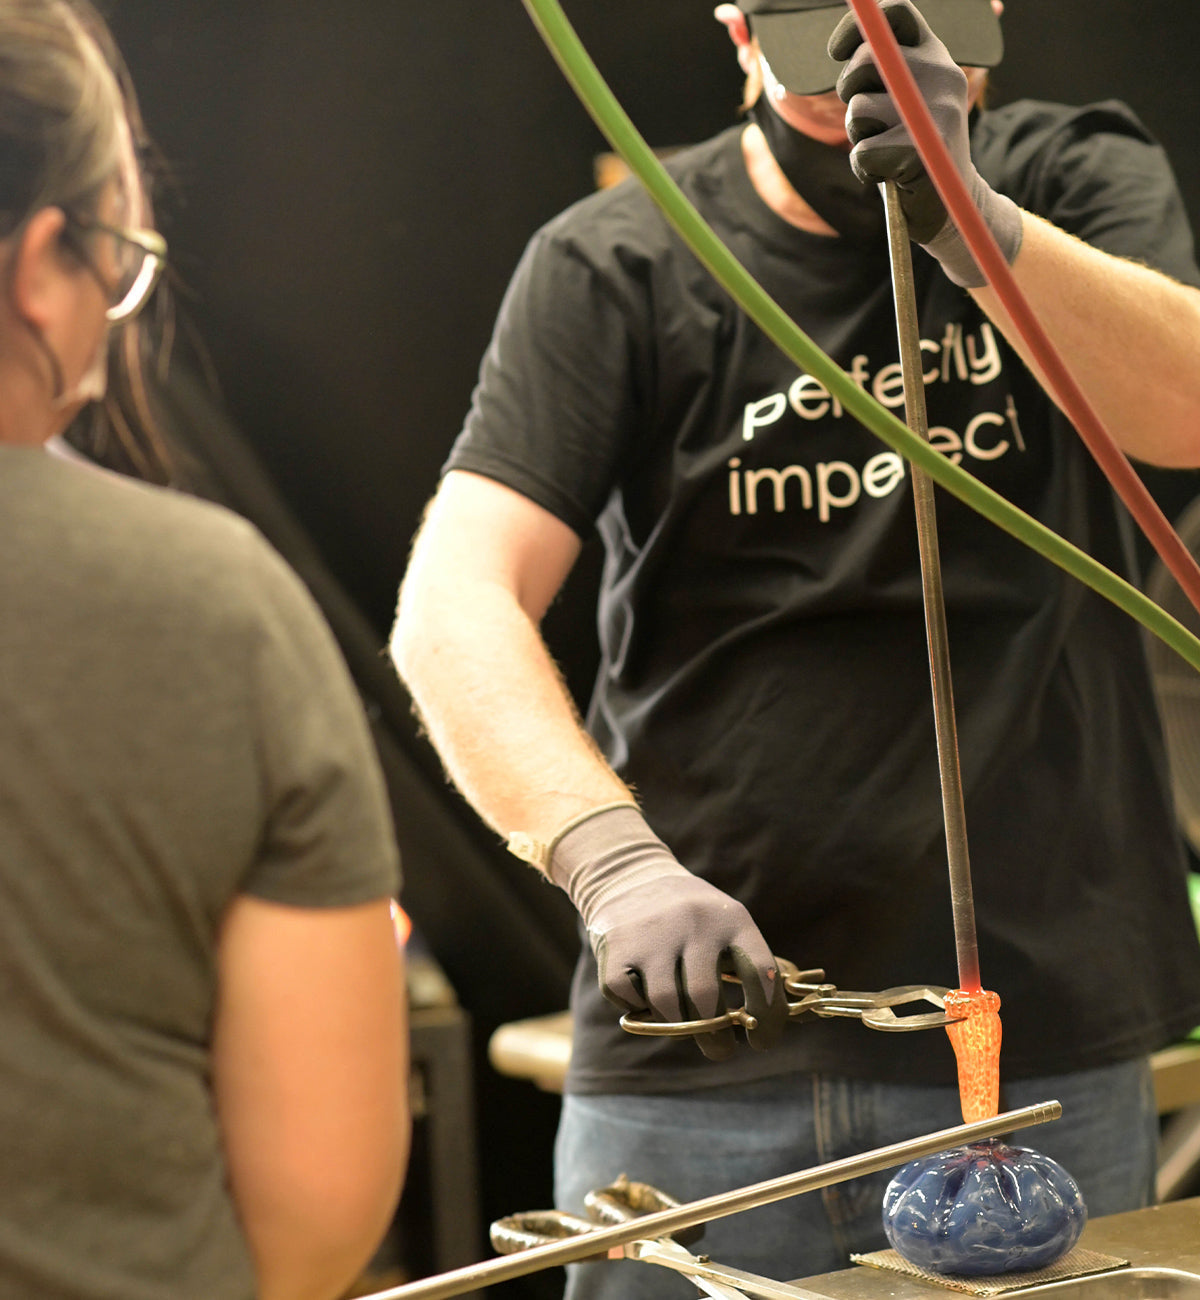 crafting a hand-blown glass pumpkins at glassblowing event